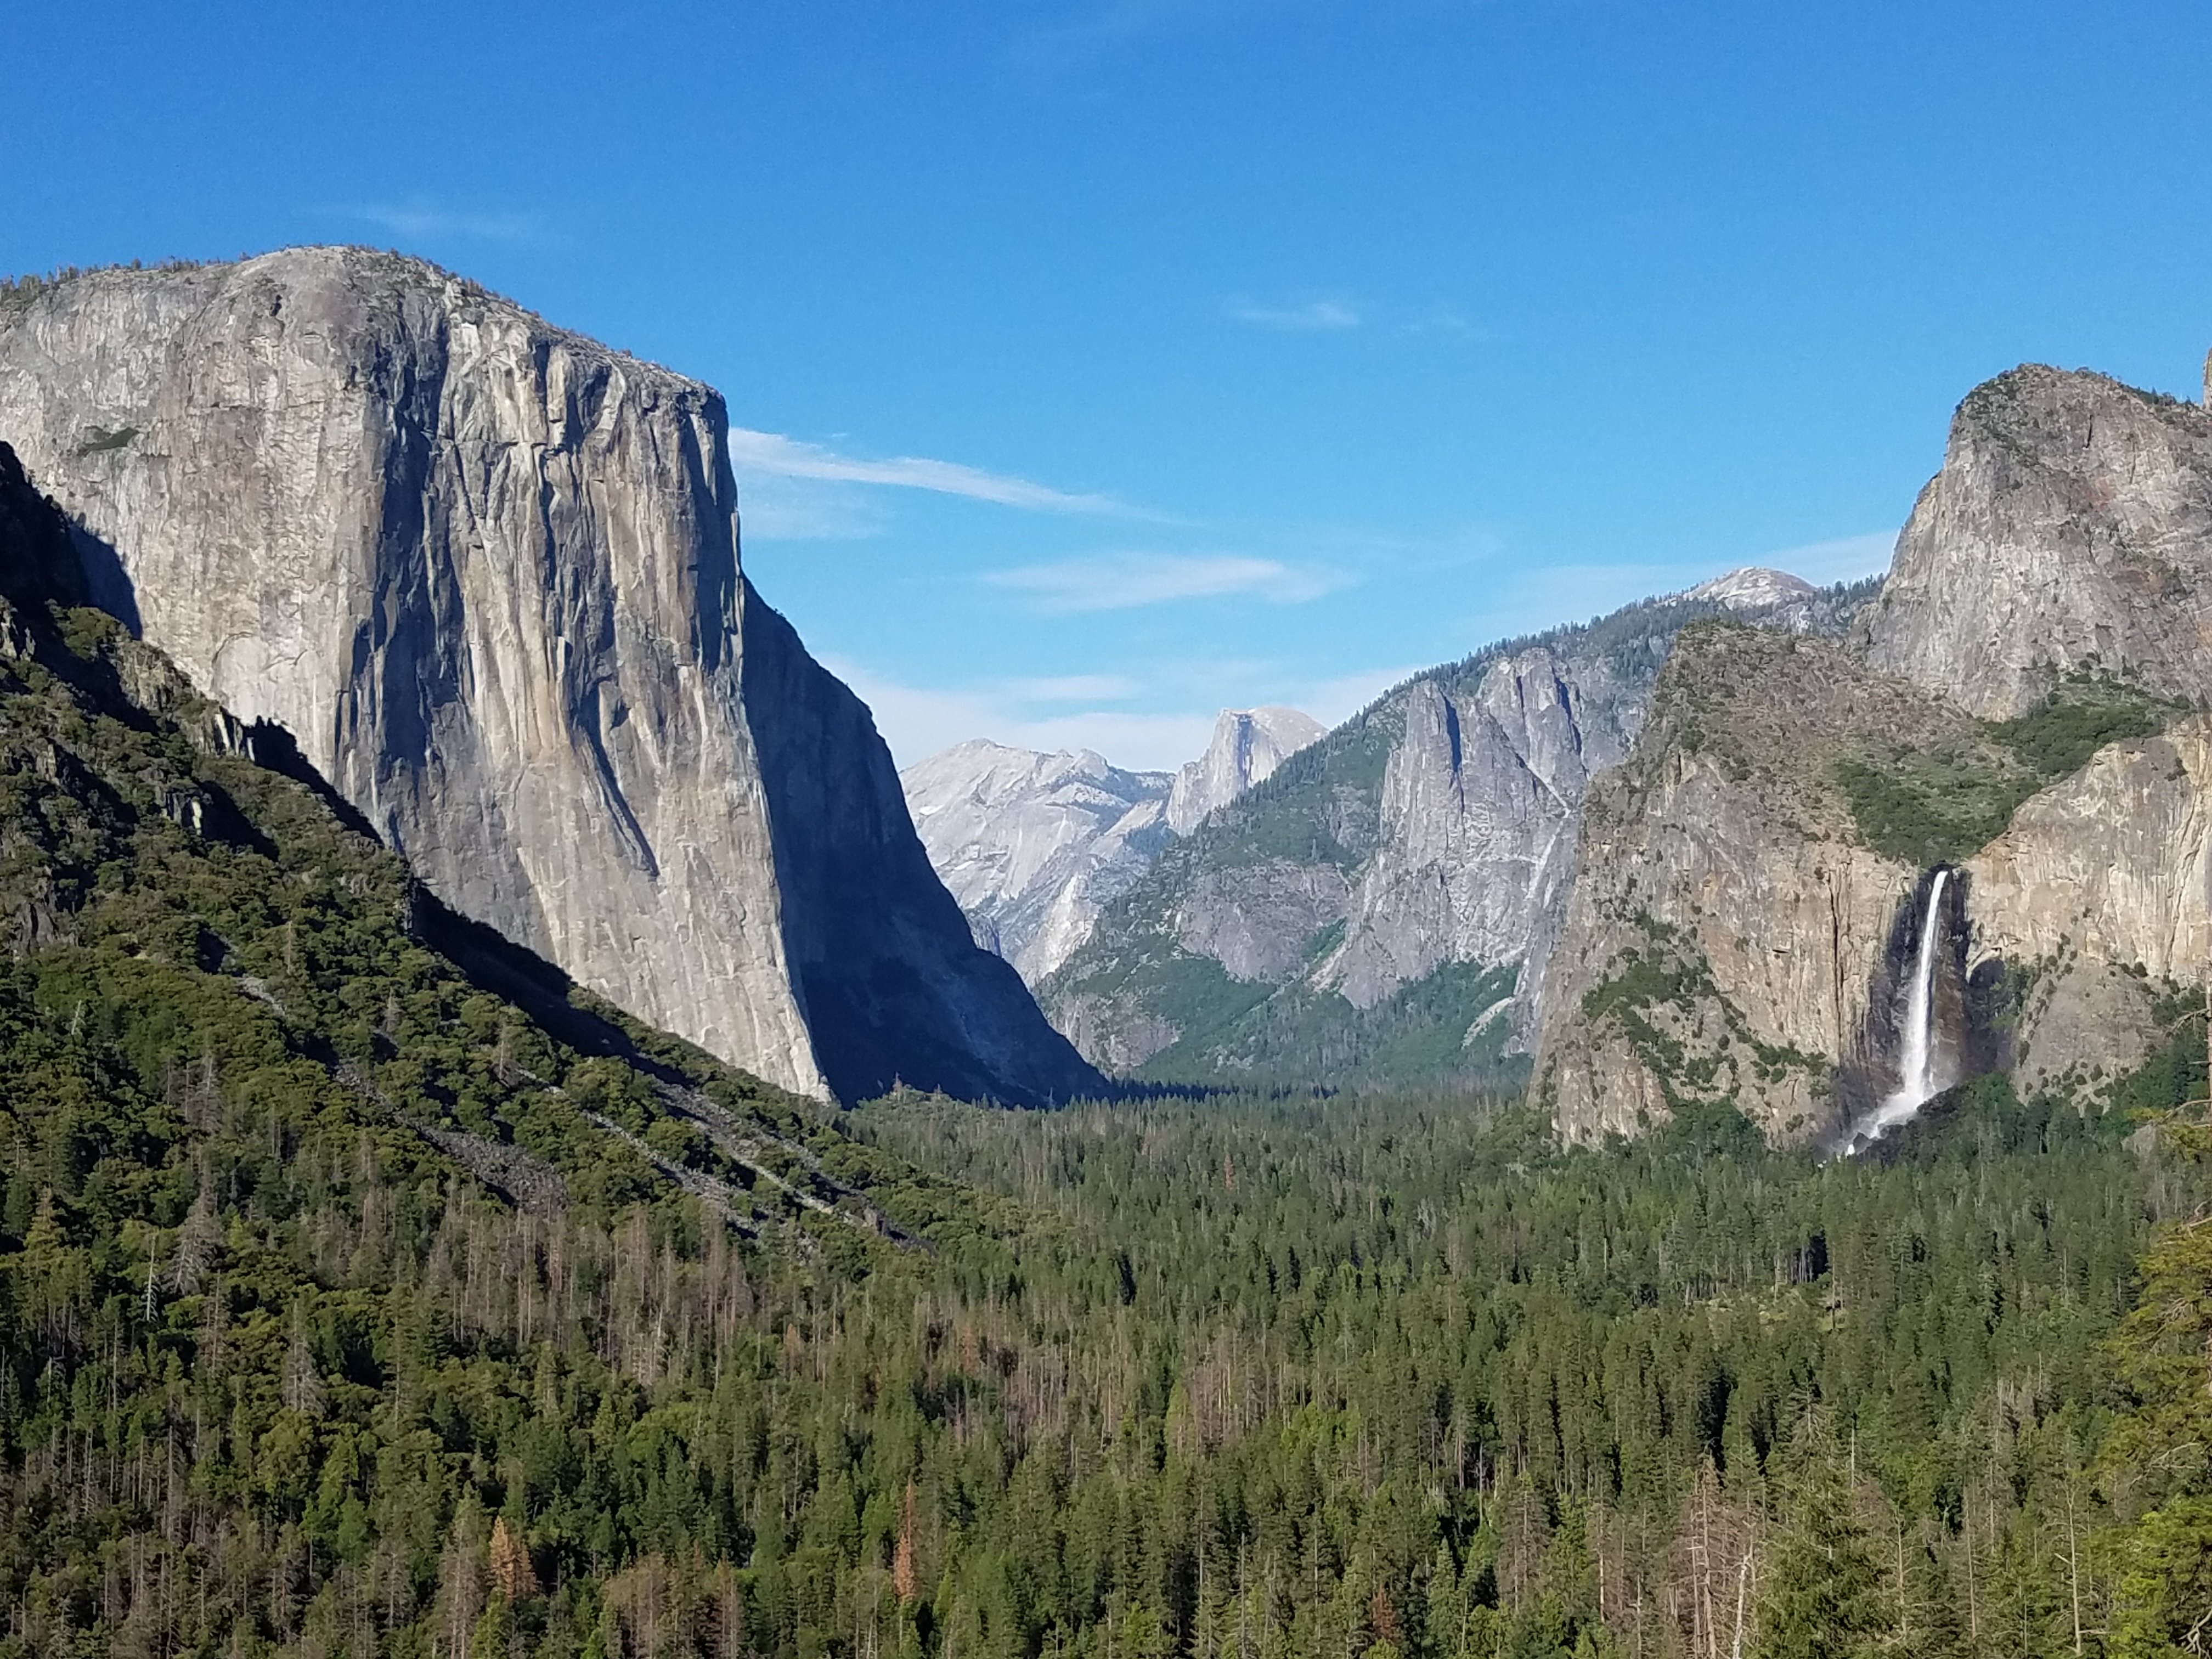 Visiting Sequoia and Yosemite National Parks